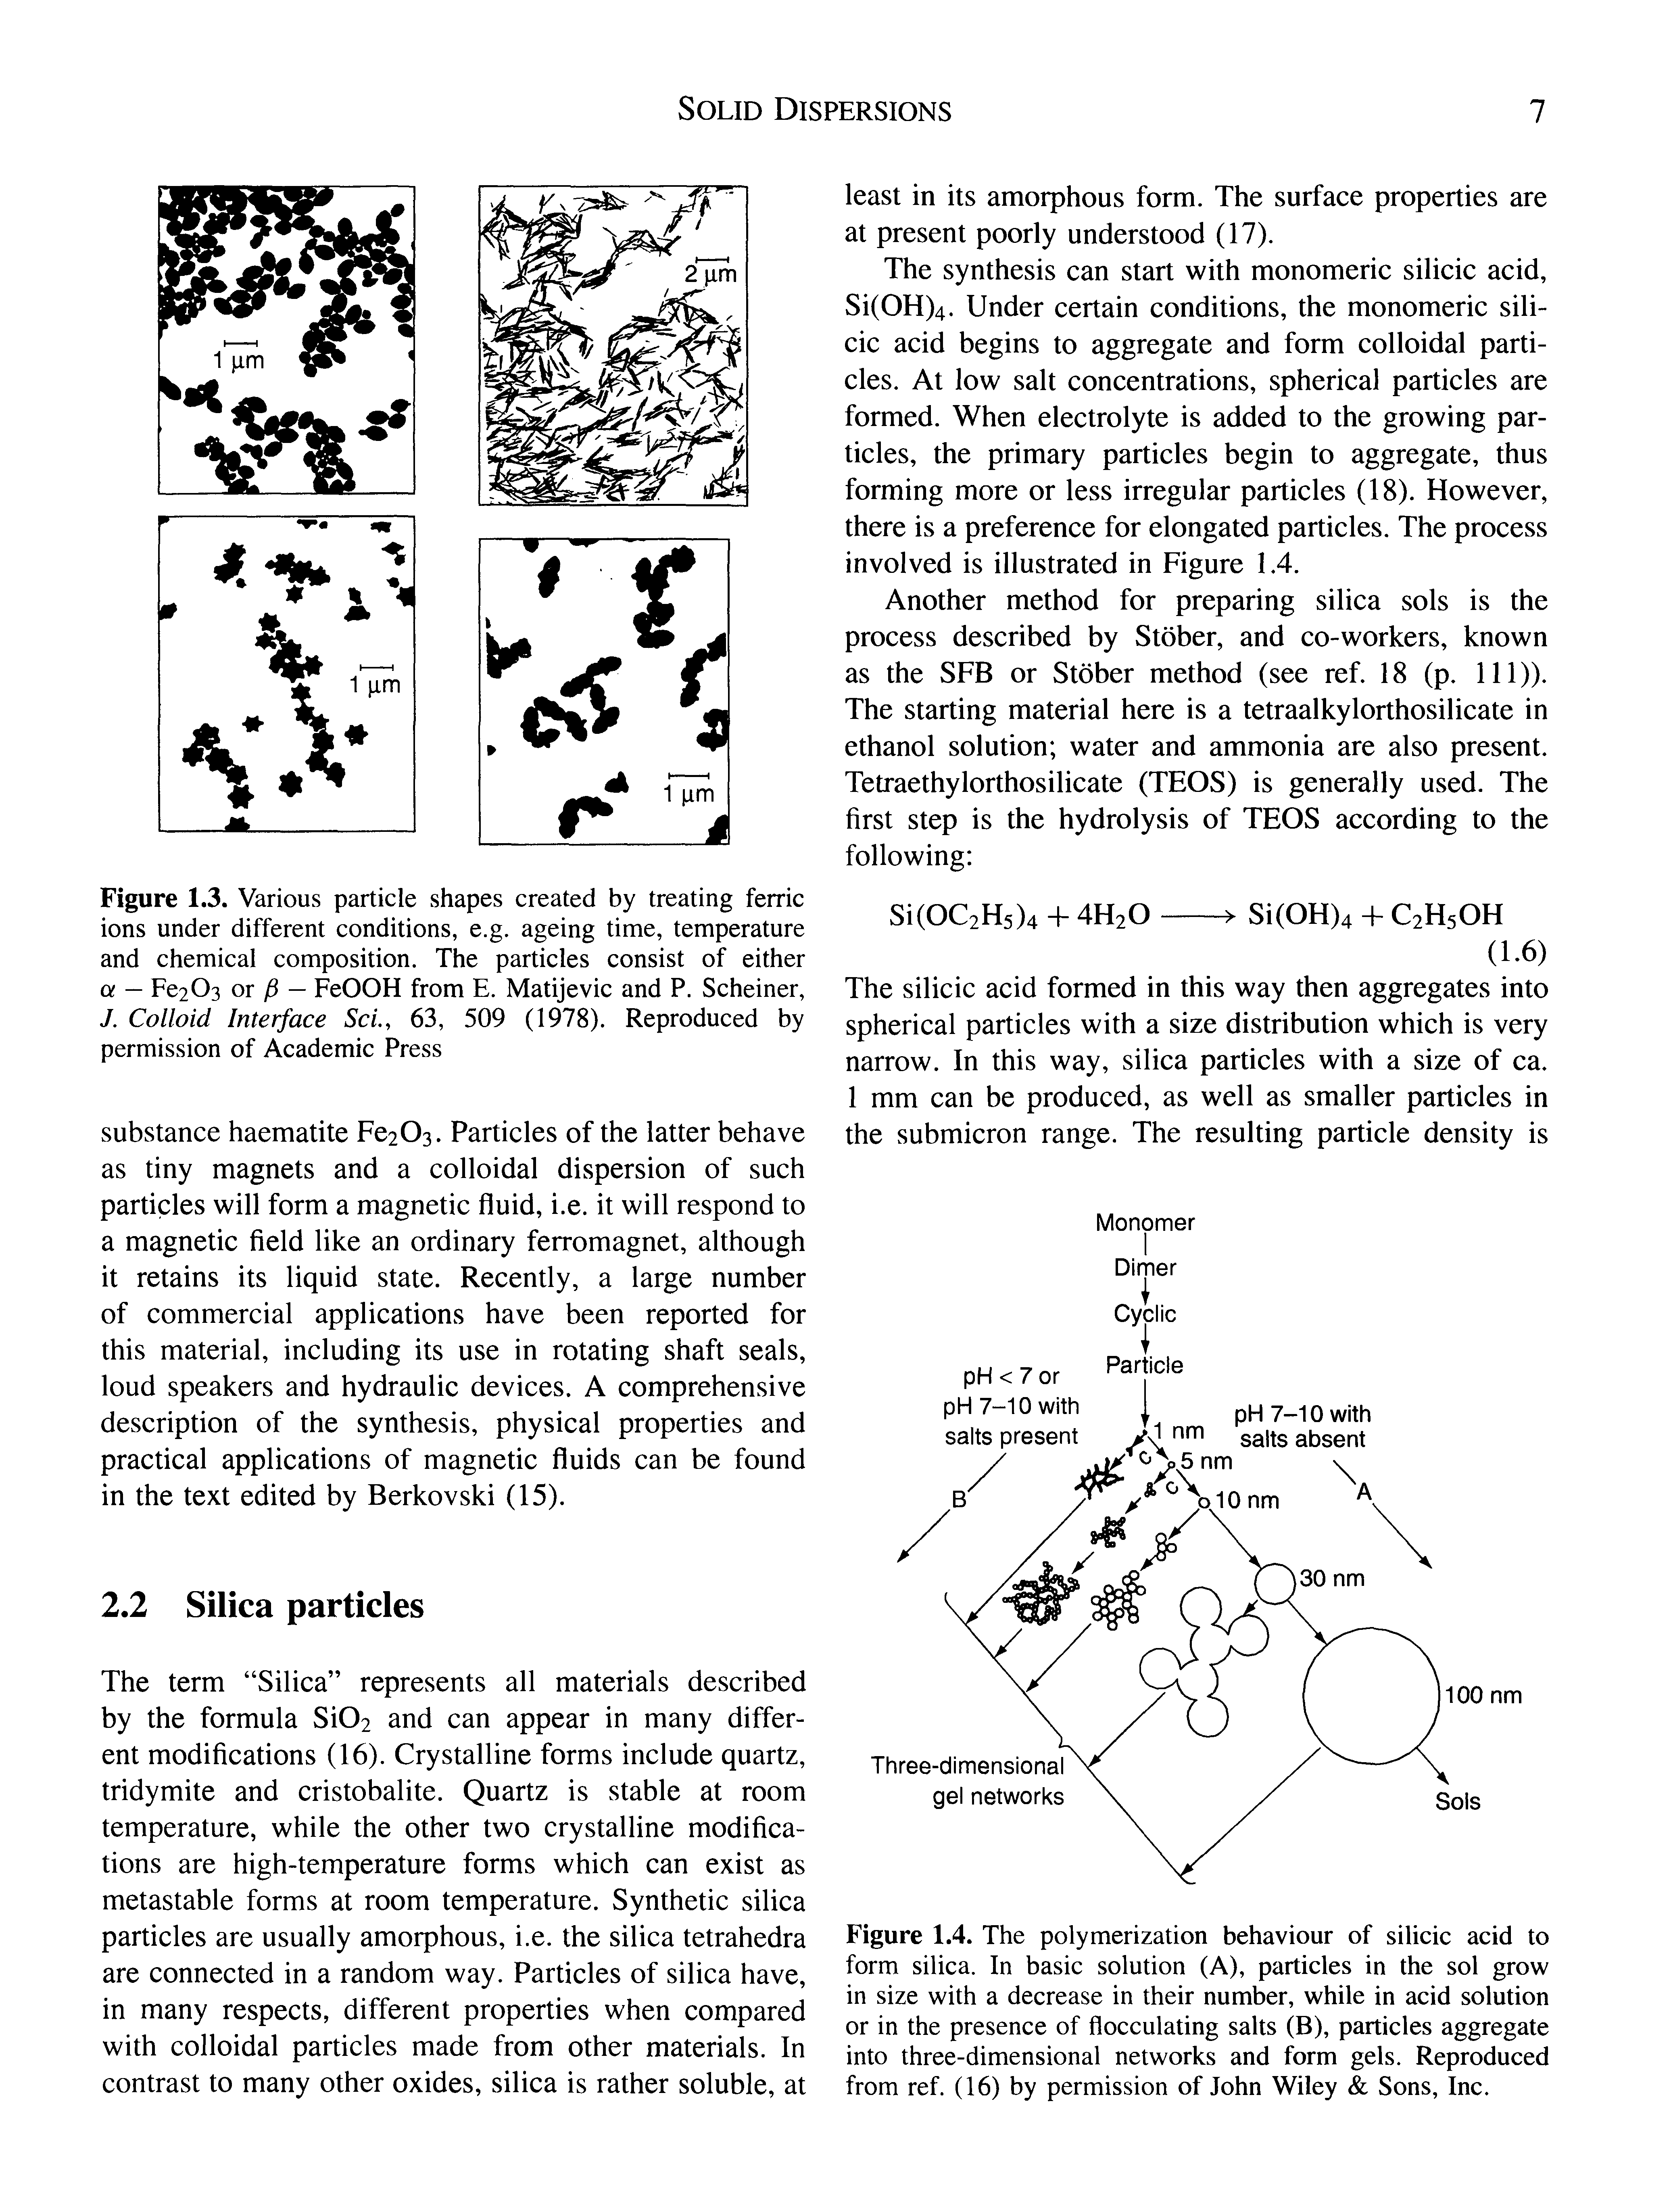 Figure 1.4. The polymerization behaviour of silicic acid to form silica. In basic solution (A), particles in the sol grow in size with a decrease in their number, while in acid solution or in the presence of flocculating salts (B), particles aggregate into three-dimensional networks and form gels. Reproduced from ref. (16) by permission of John Wiley Sons, Inc.